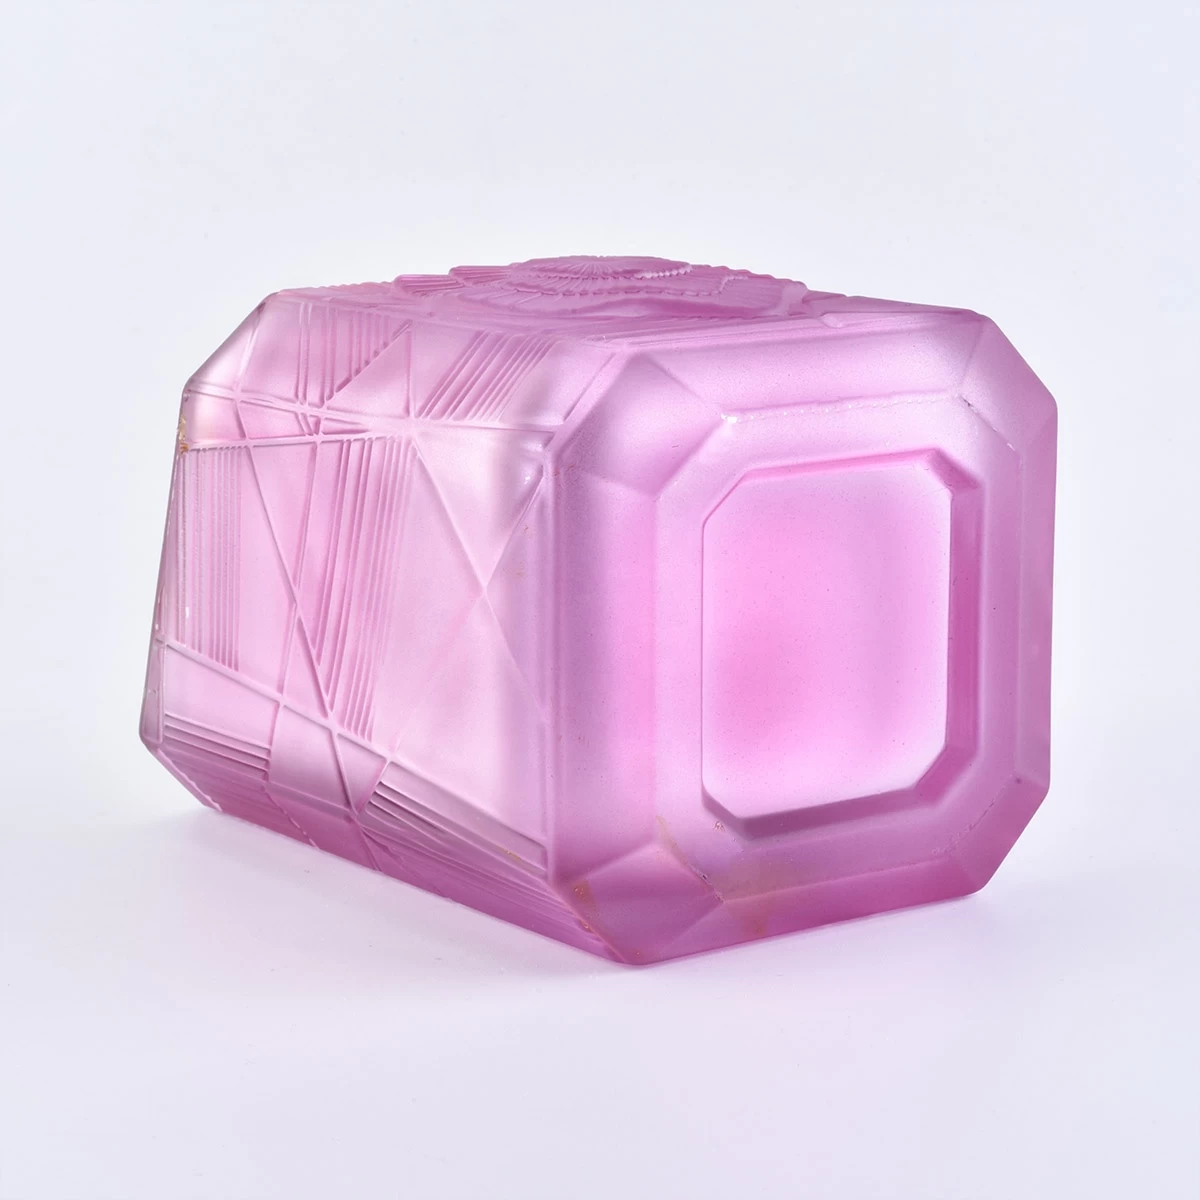 Sunny design custom pink luxury square Glass candle holder